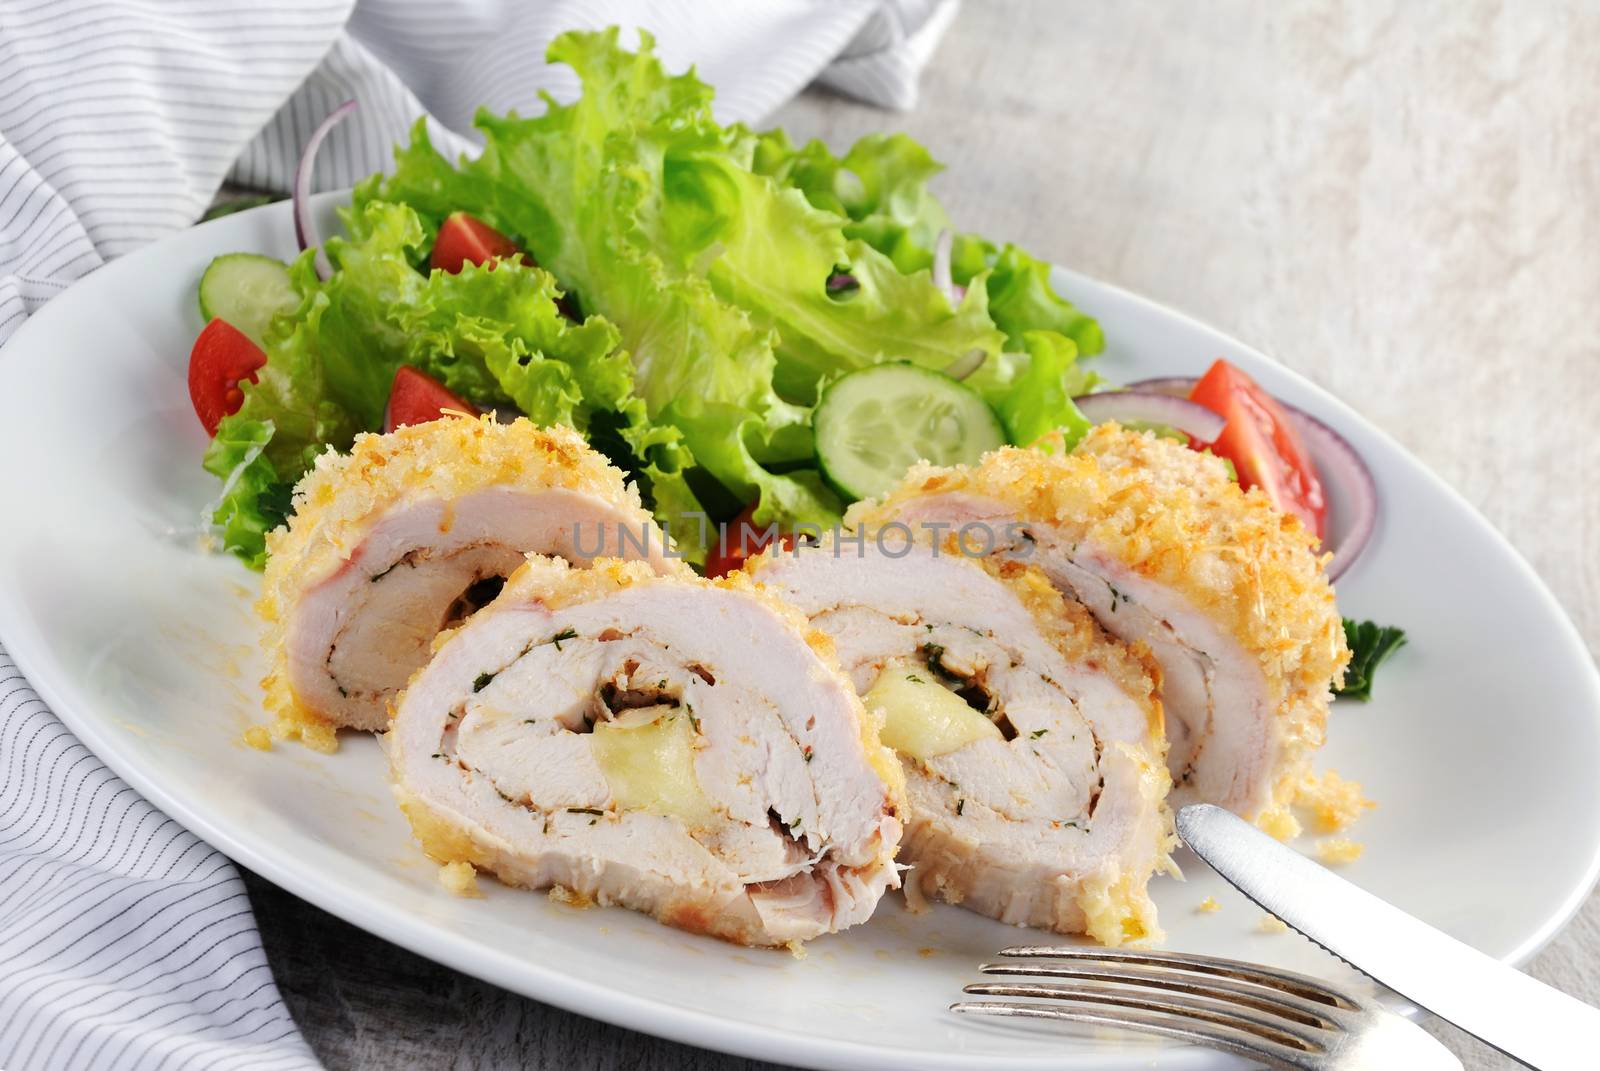 Sliced baked until golden, crispy crust chicken roll in breadcrumbs with Parmesan cheese, stuffed with cheese with herbs and garnish of vegetables.